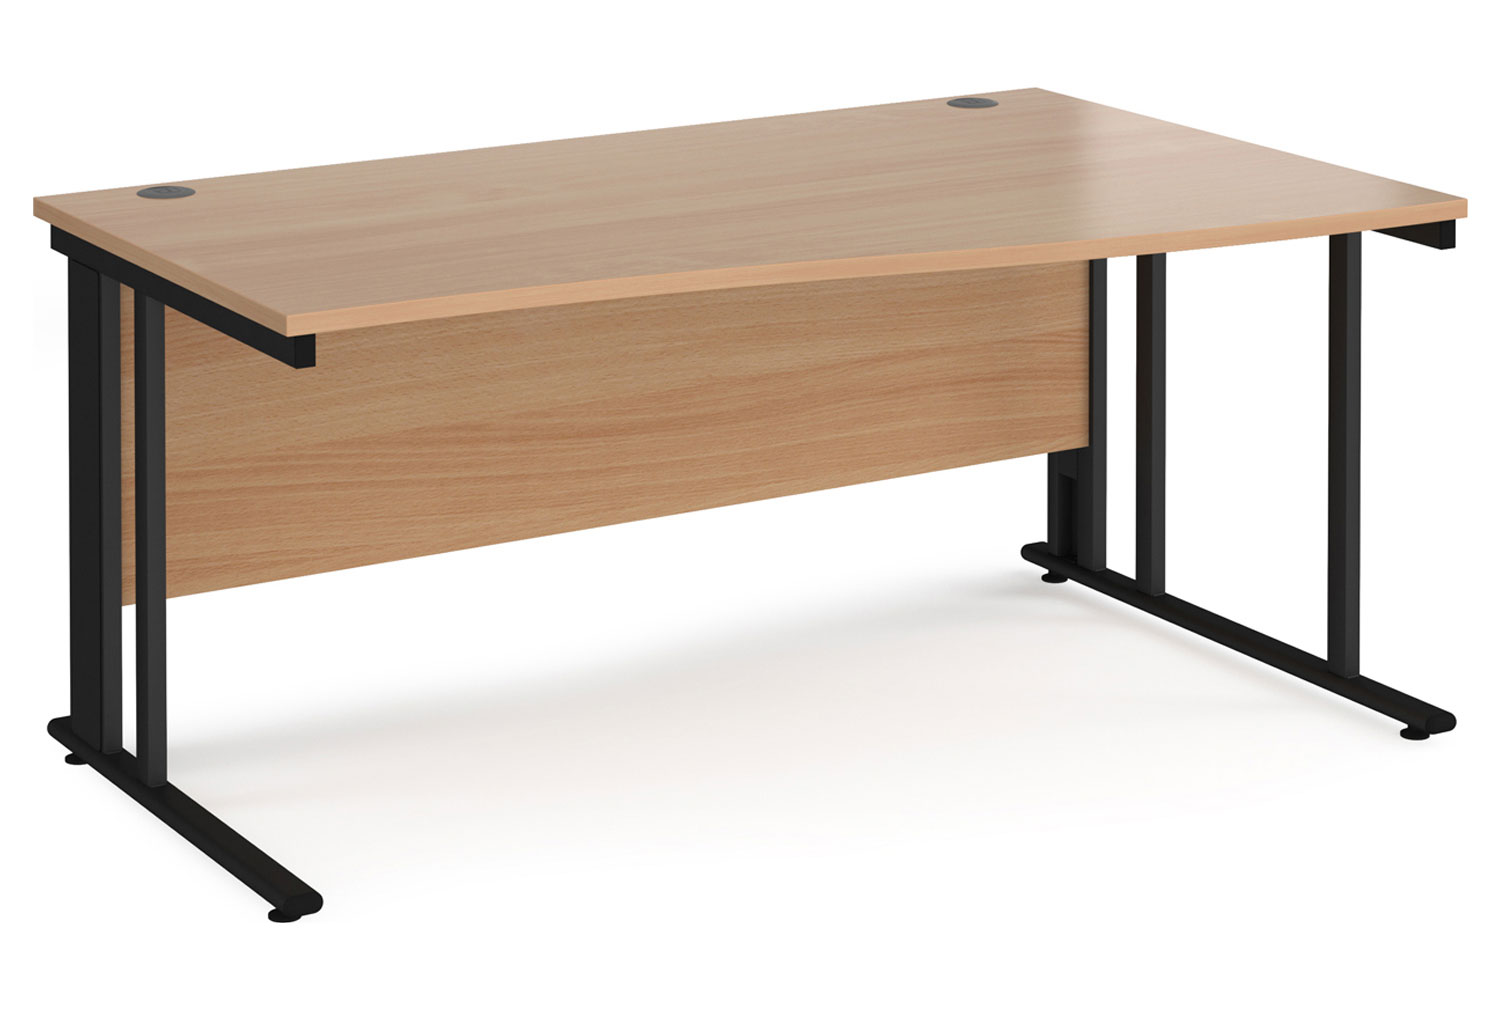 Value Line Deluxe Cable Managed Right Hand Wave Office Desk (Black Legs), 160wx80dx73h (cm), Beech, Express Delivery